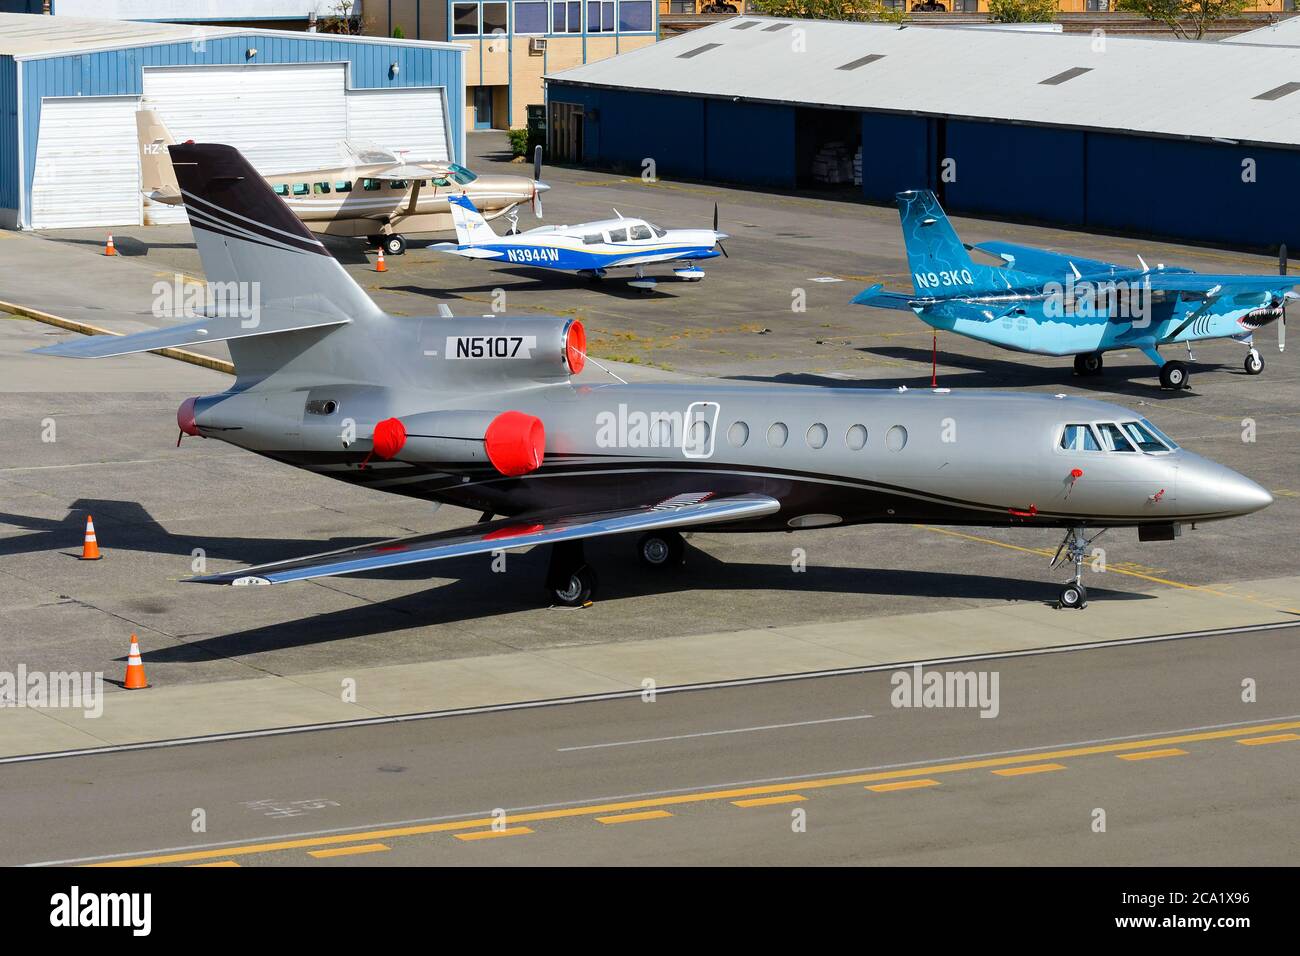 Dassault Falcon 50 private aircraft parked at King County International Airport, WA, USA. Business jet. Stock Photo